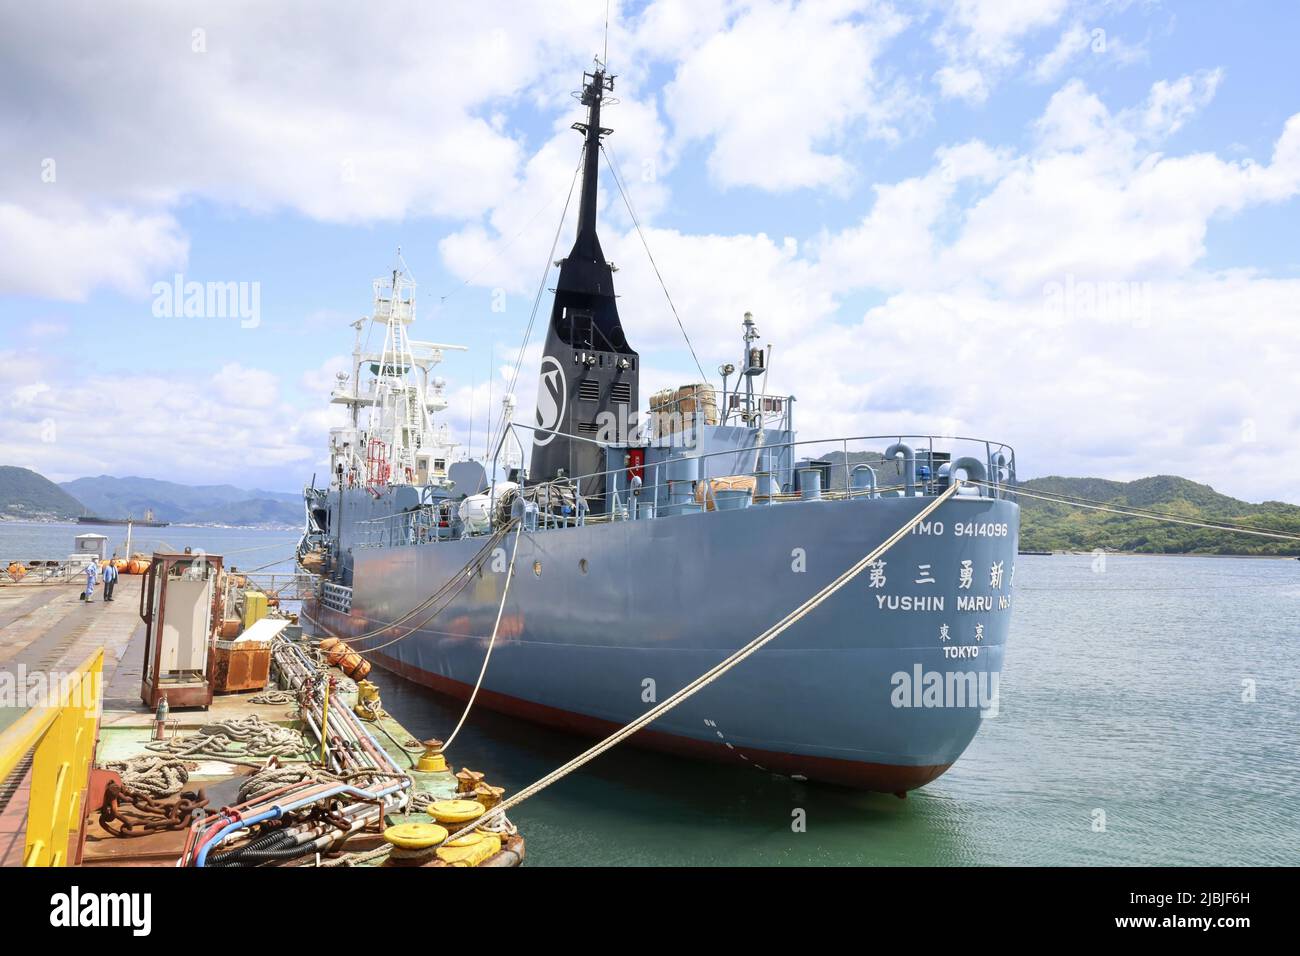 The Japanese commercial whaling ship Yushin Maru No. 3 is pictured ahead of its departure from the Hiroshima Prefecture city of Onomichi, western Japan, on June 7, 2022. Japan entered its fourth season of commercial whaling since the end of an around 30-year hiatus in 2019. (Kyodo)==Kyodo Photo via Credit: Newscom/Alamy Live News Stock Photo